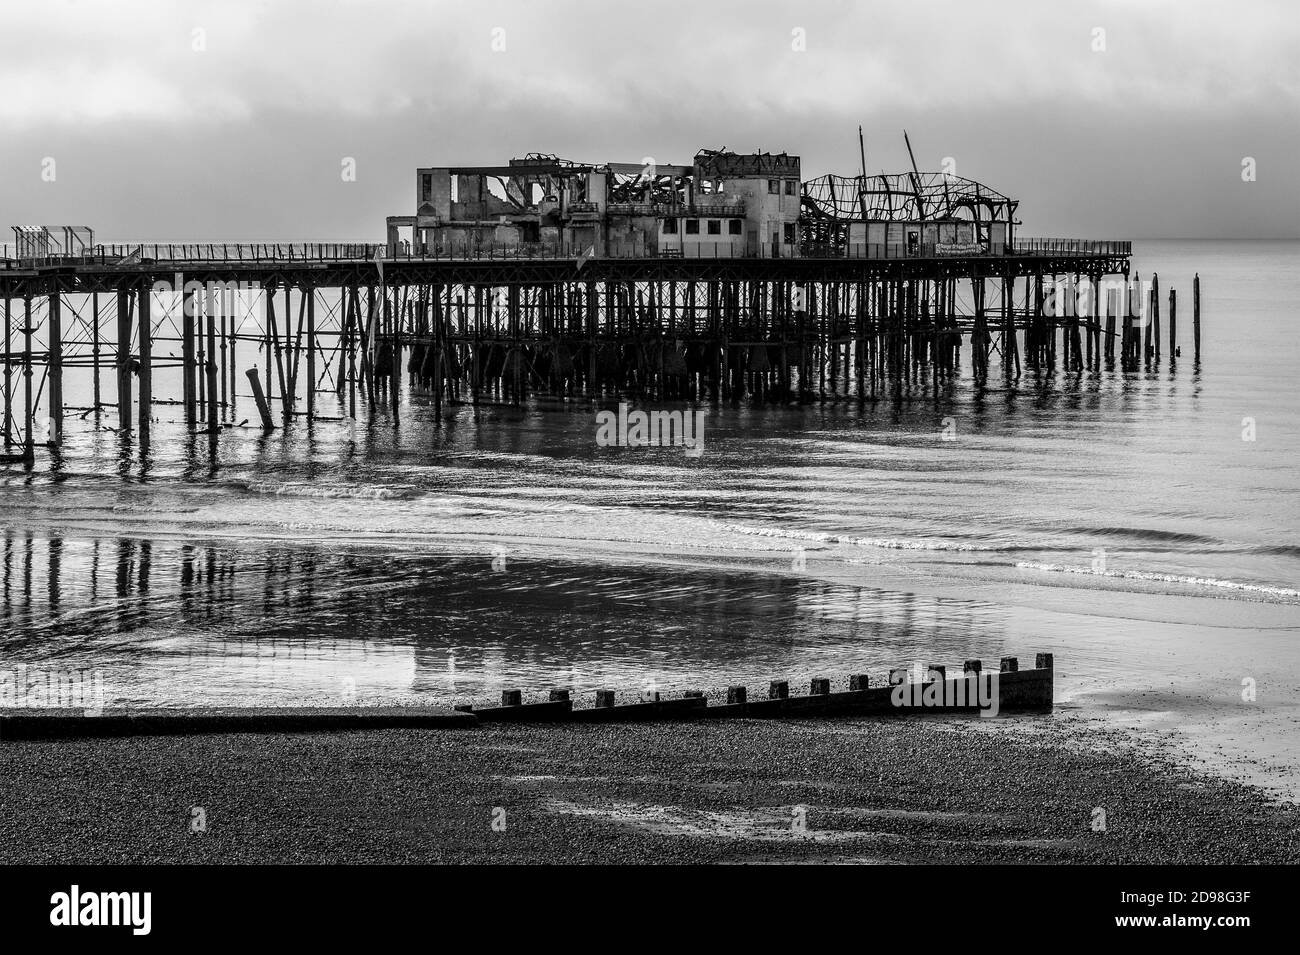 Monochrome view of the gaunt and twisted wreckage of Hastings Pier in East Sussex, England, UK, photographed seven months after the devastating fire of 2010.  The Victorian pier, opened in 1872, hosted major rock and pop acts in the 1960s, including Pink Floyd, Jimi Hendrix, The Rolling Stones and The Who.  Fire destroyed the 2,000 seat Hastings Pier Pavilion in 1972, the pier was closed as a dangerous structure and the blaze on 5 October 2010 destroyed its remaining wooden buildings.  Rebuilding work was launched in 2011 and the pier reopened in 2016. Stock Photo